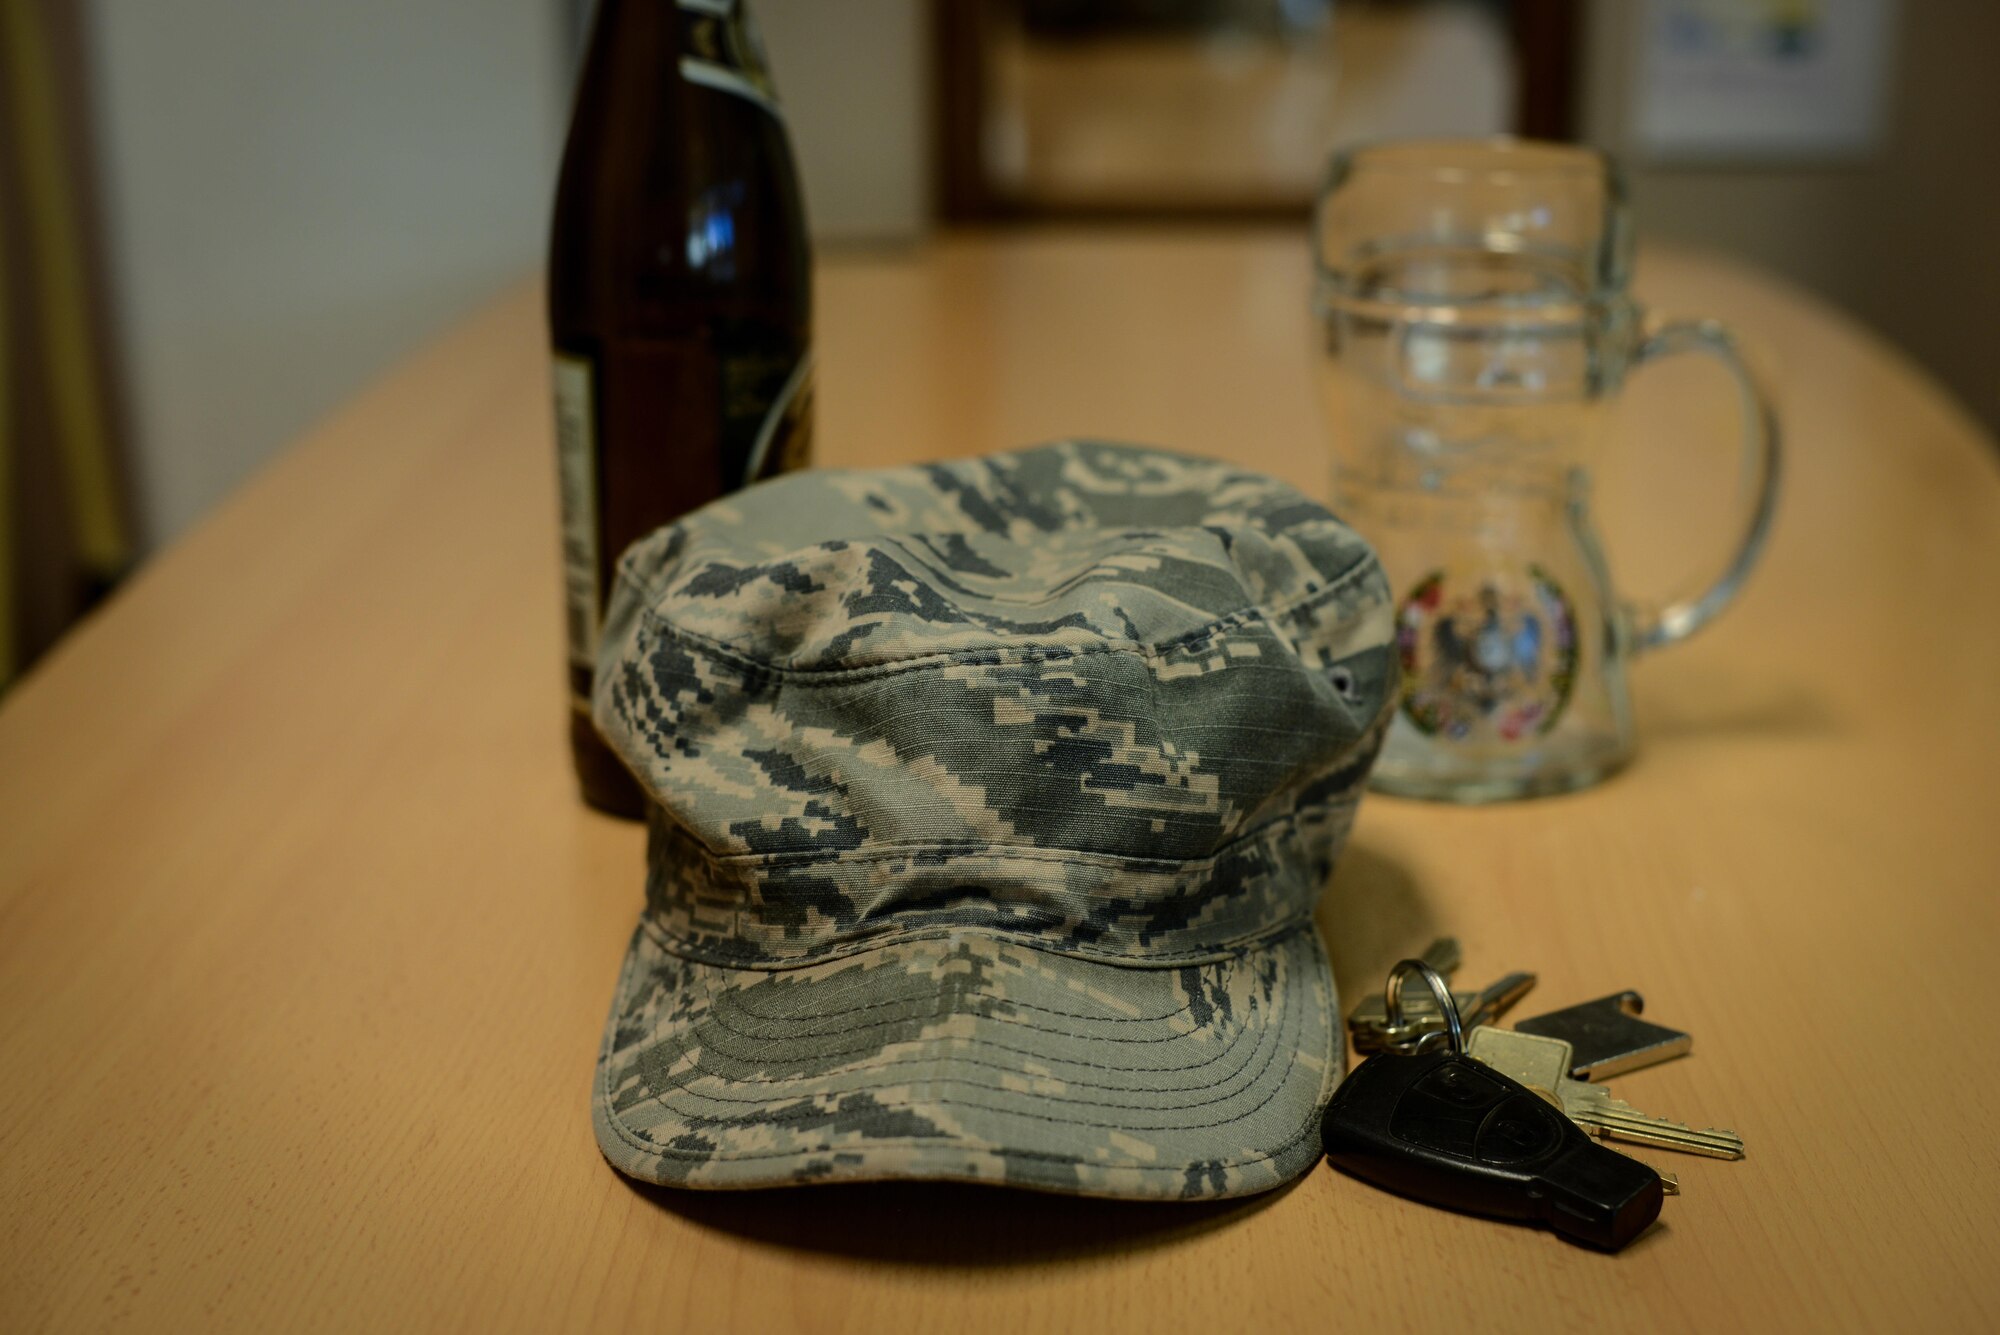 A crumpled Airman Battle Uniform cap lies on a table next to a key set, beer bottle, and beer mug at Ramstein Air Base, Germany, Jan. 20, 2017. The Airman Against Drunk Driving program is available at many Air Force Bases and aims to prevent cases of DUI among Airmen. (U.S. Force photo by Airman 1st Class Joshua Magbanua)